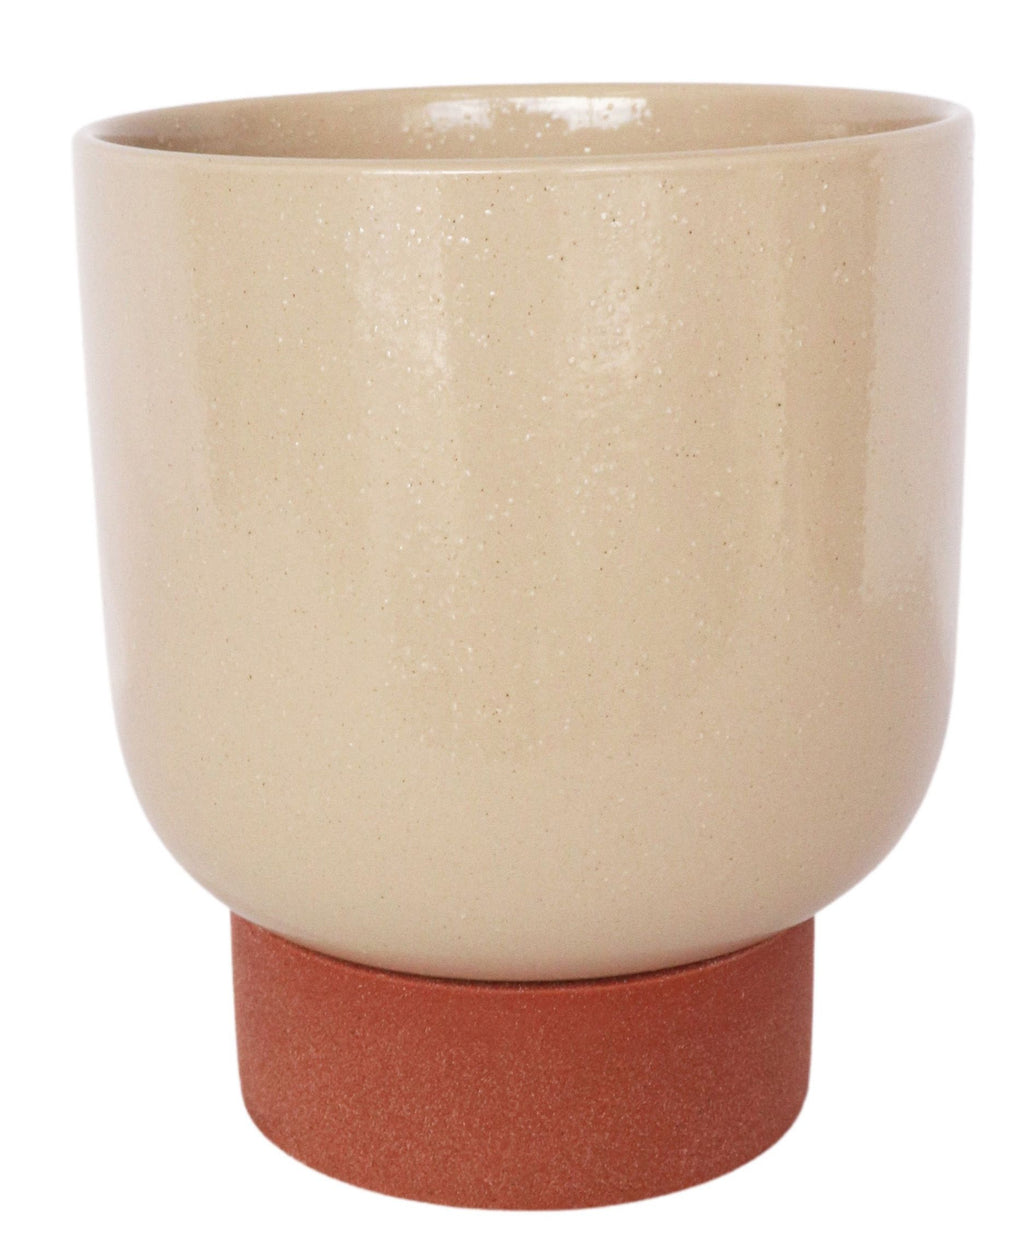 Prim Tall Planter with Saucer